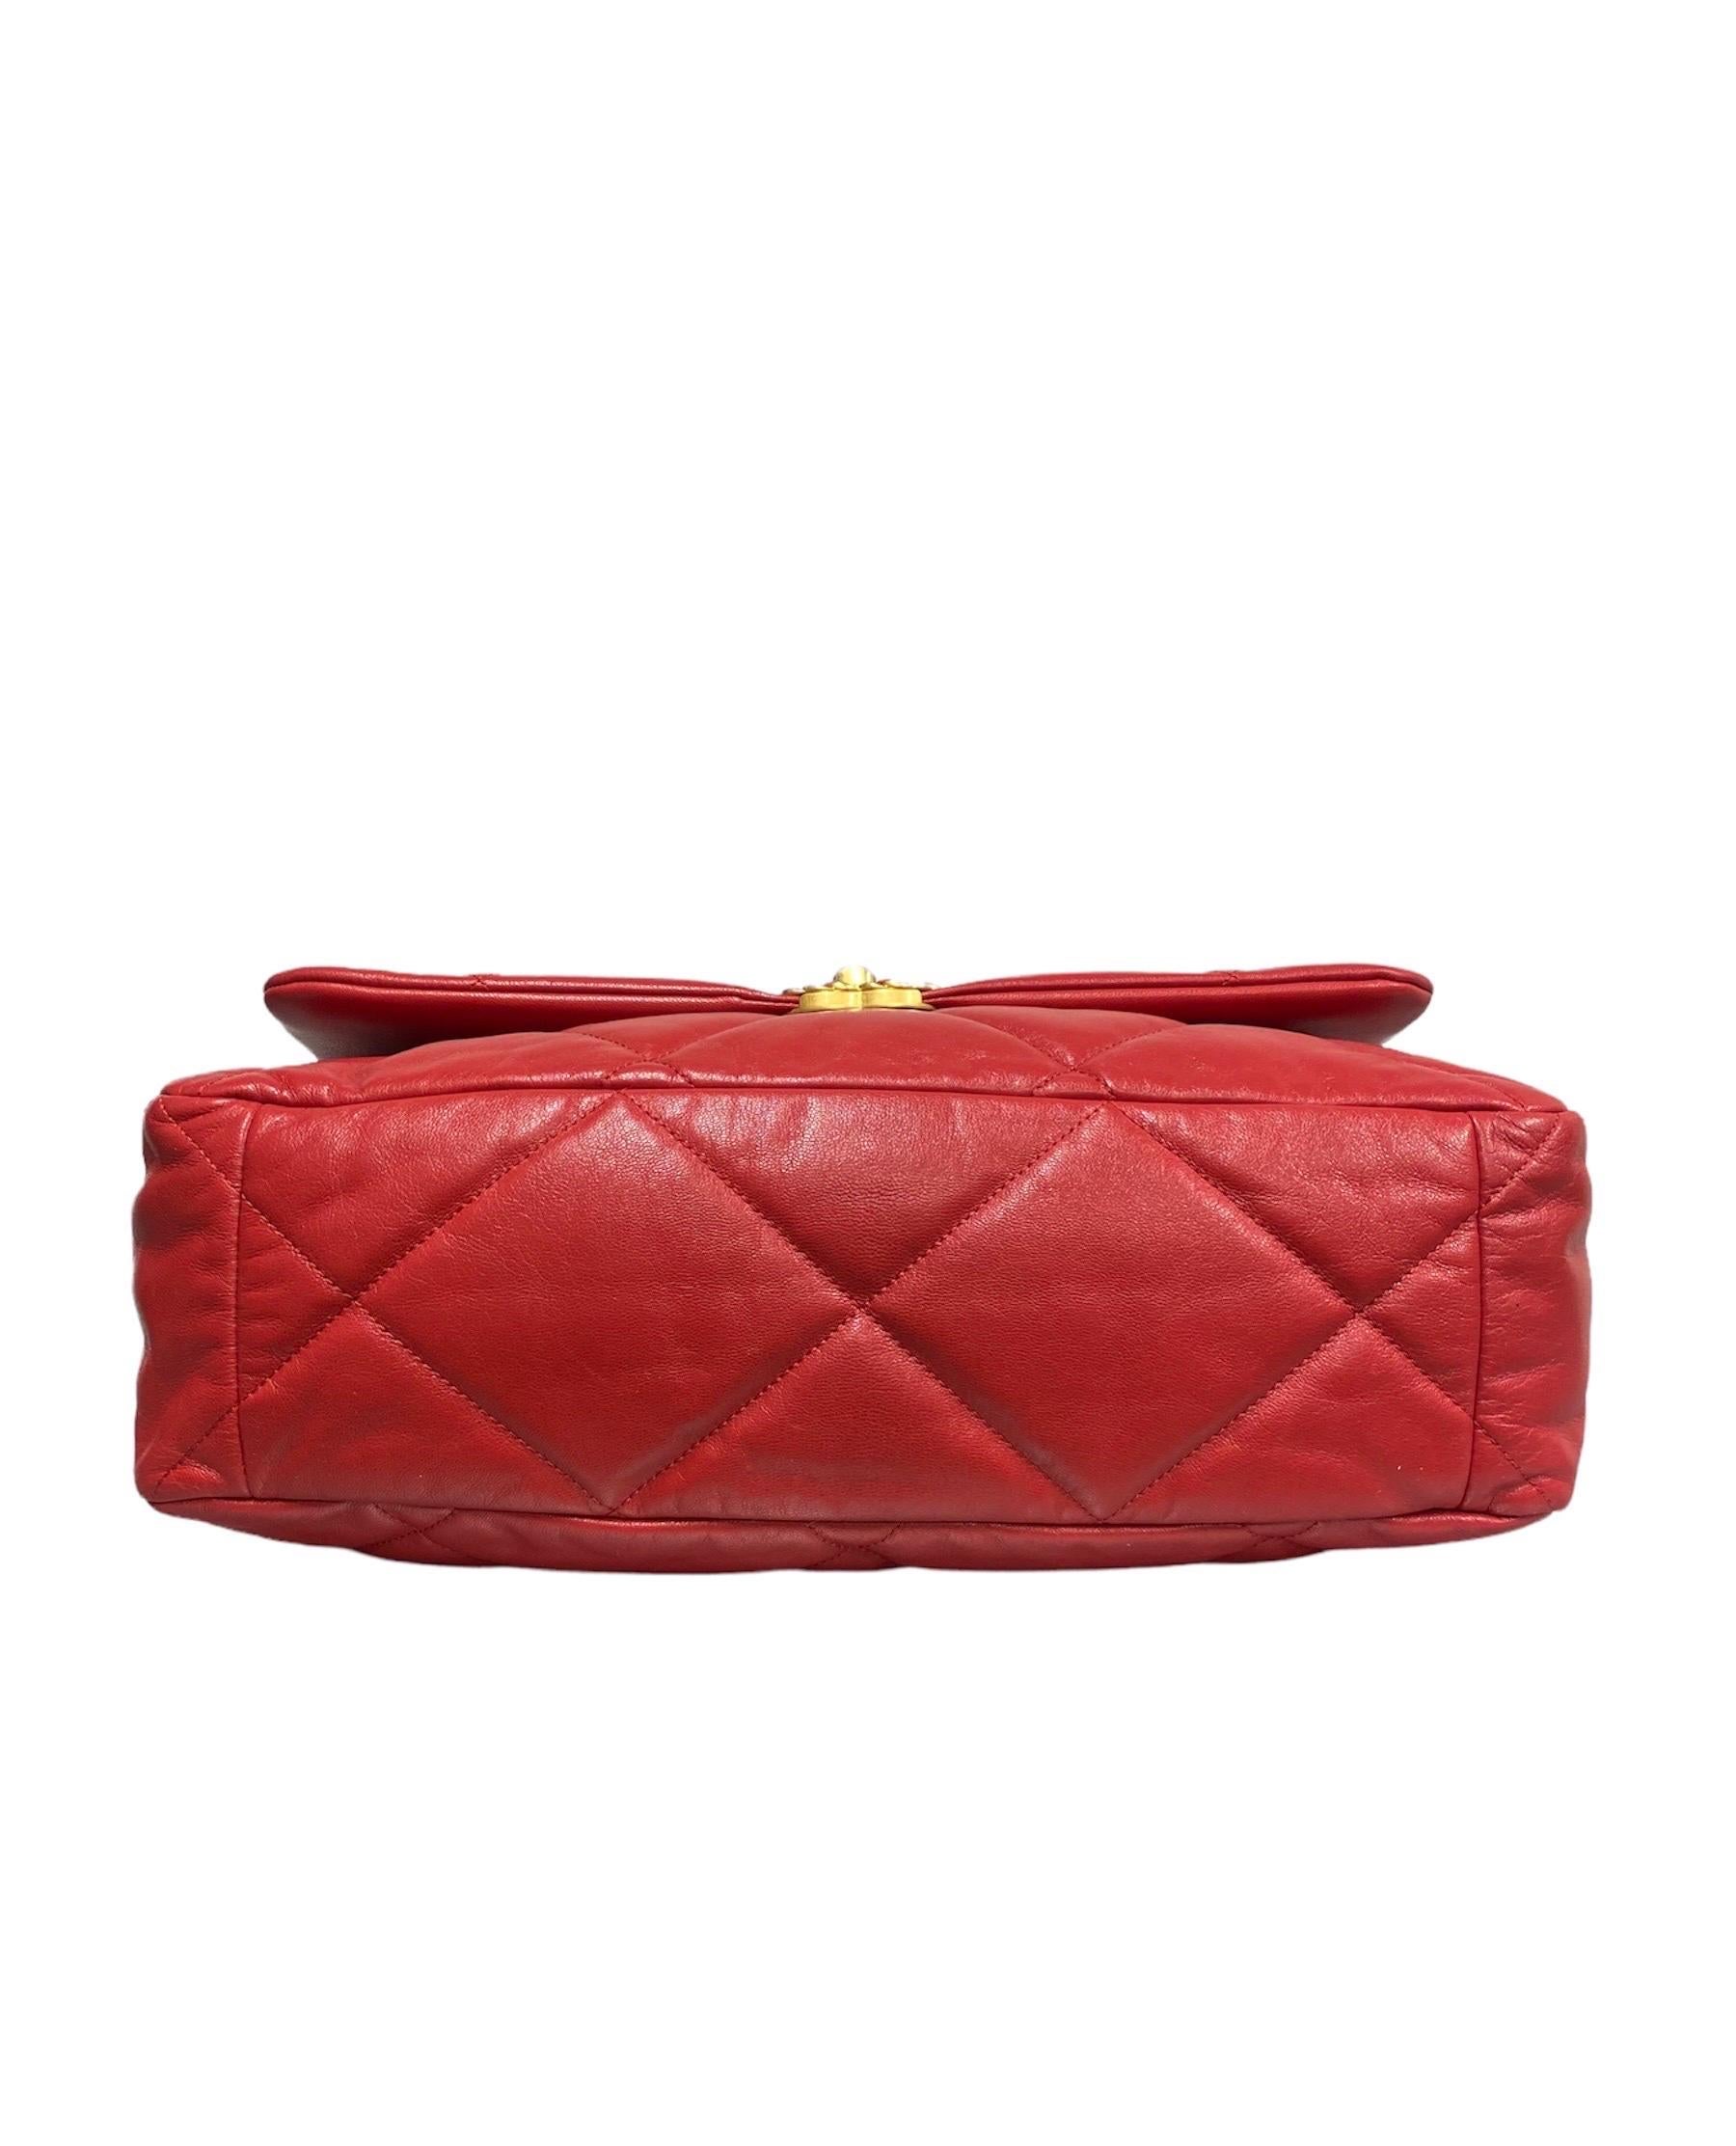 2019 Chanel 19 Red Shoulder Bag Big Size In Excellent Condition In Torre Del Greco, IT